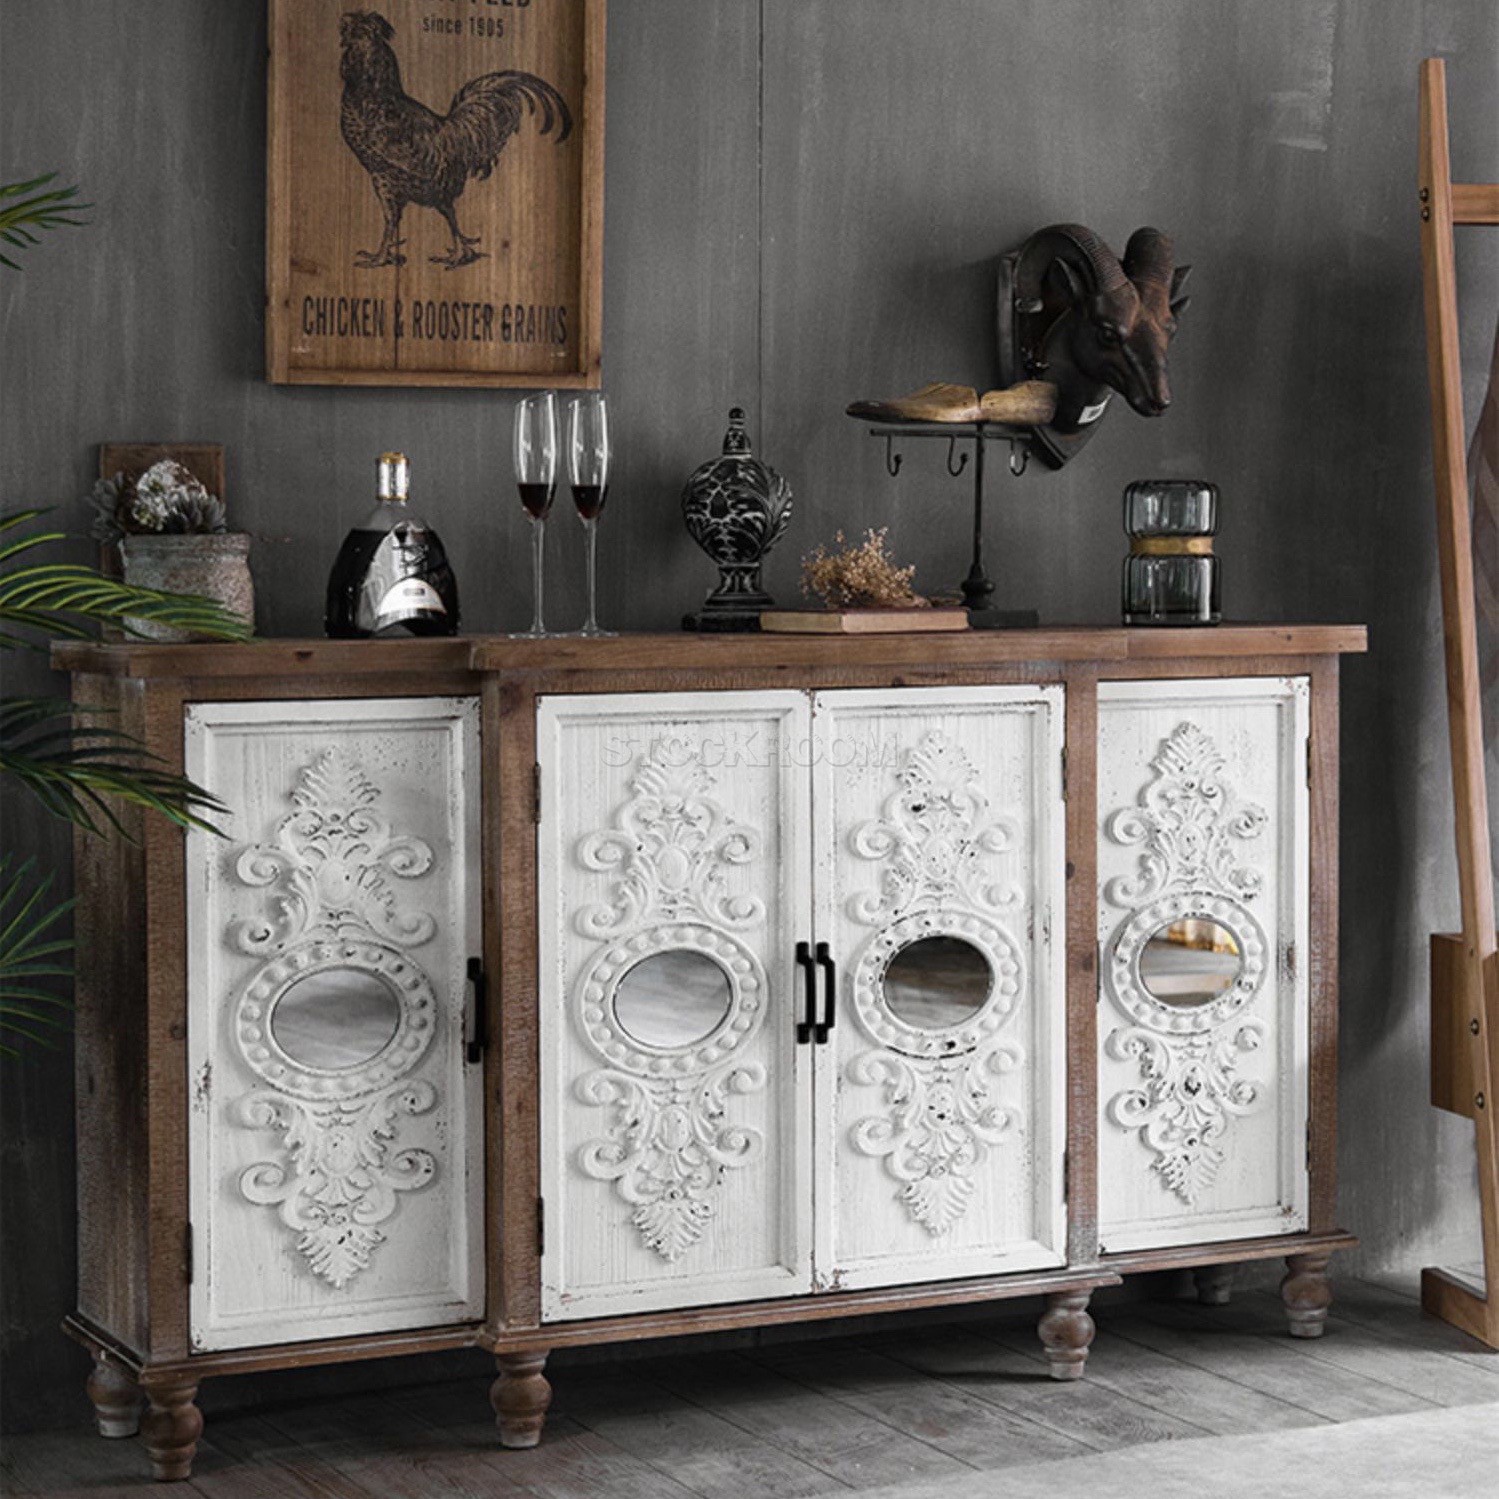 Rosanna Vintage Style 4 Doors Accent Cabinet / Sideboard